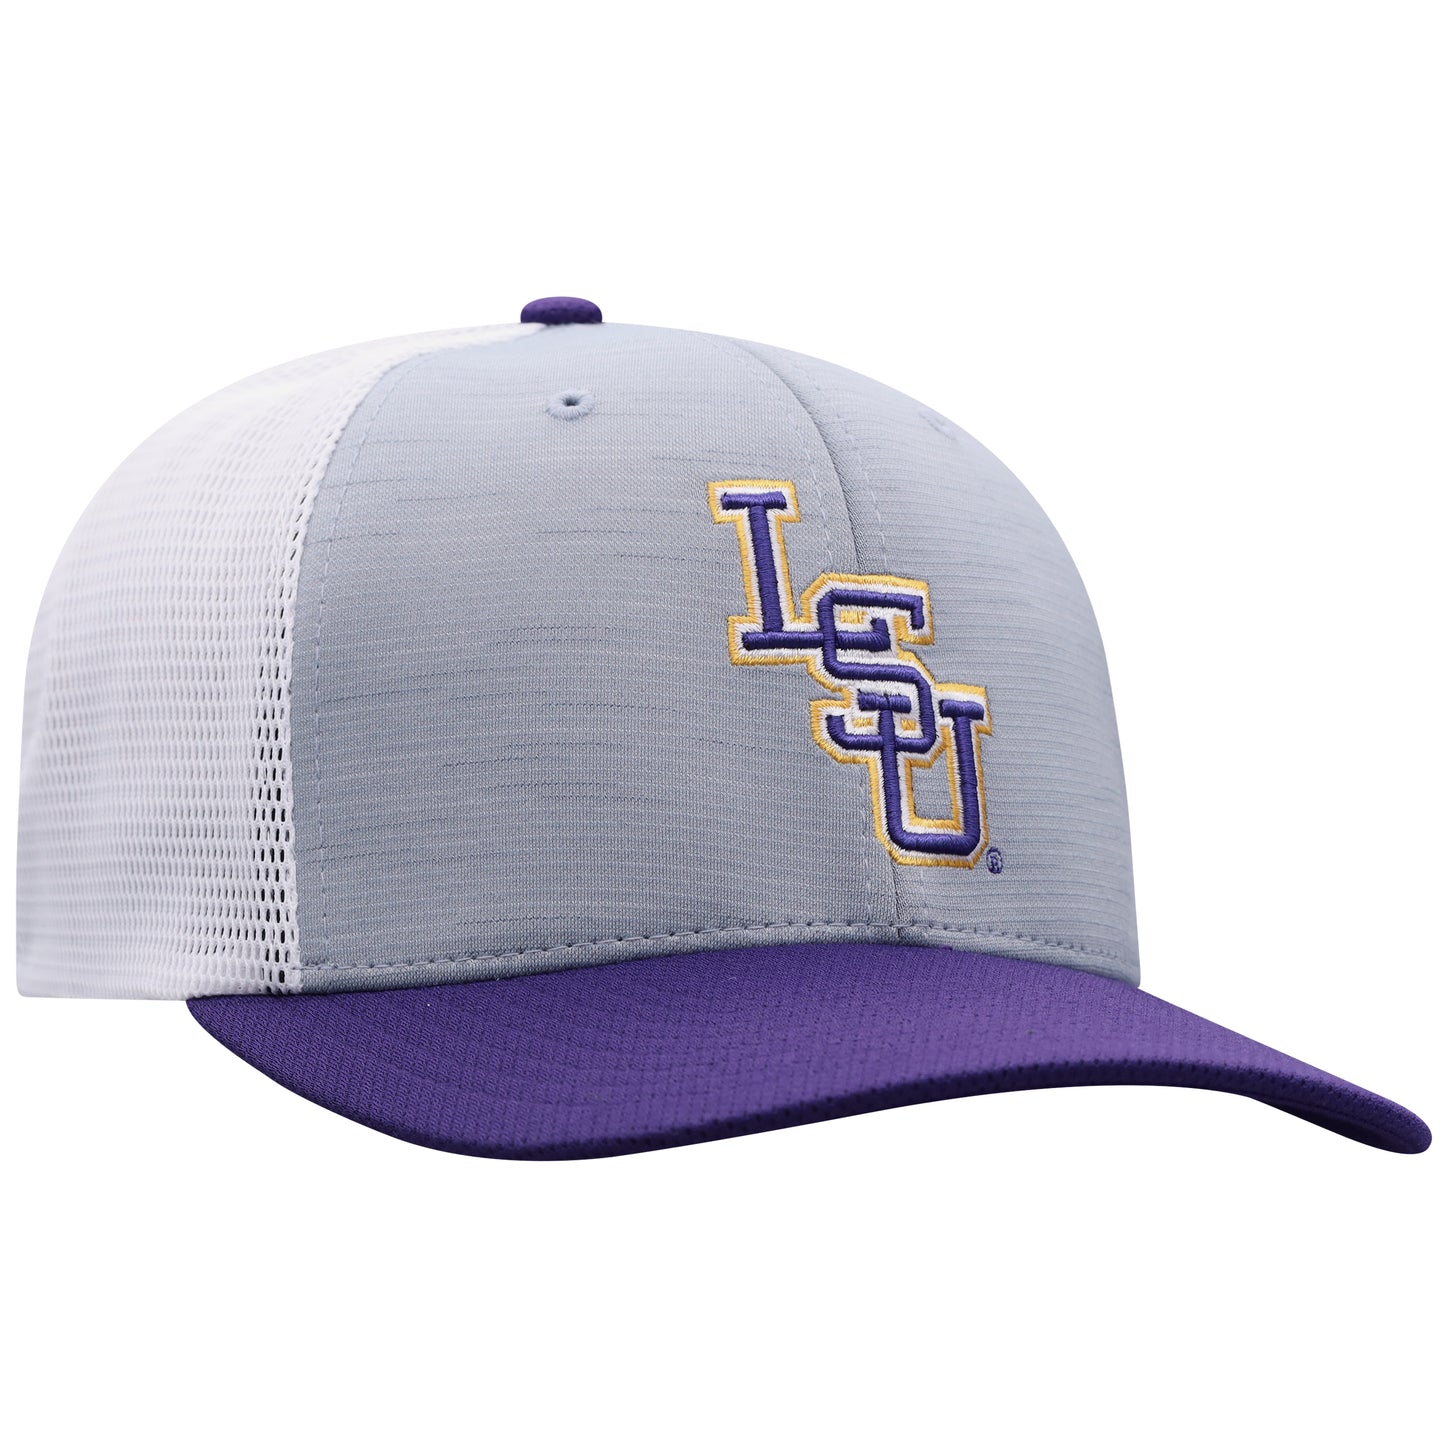 Men's LSU Tigers Stamp 3-Tone Flex Fit Hat By Top Of the World